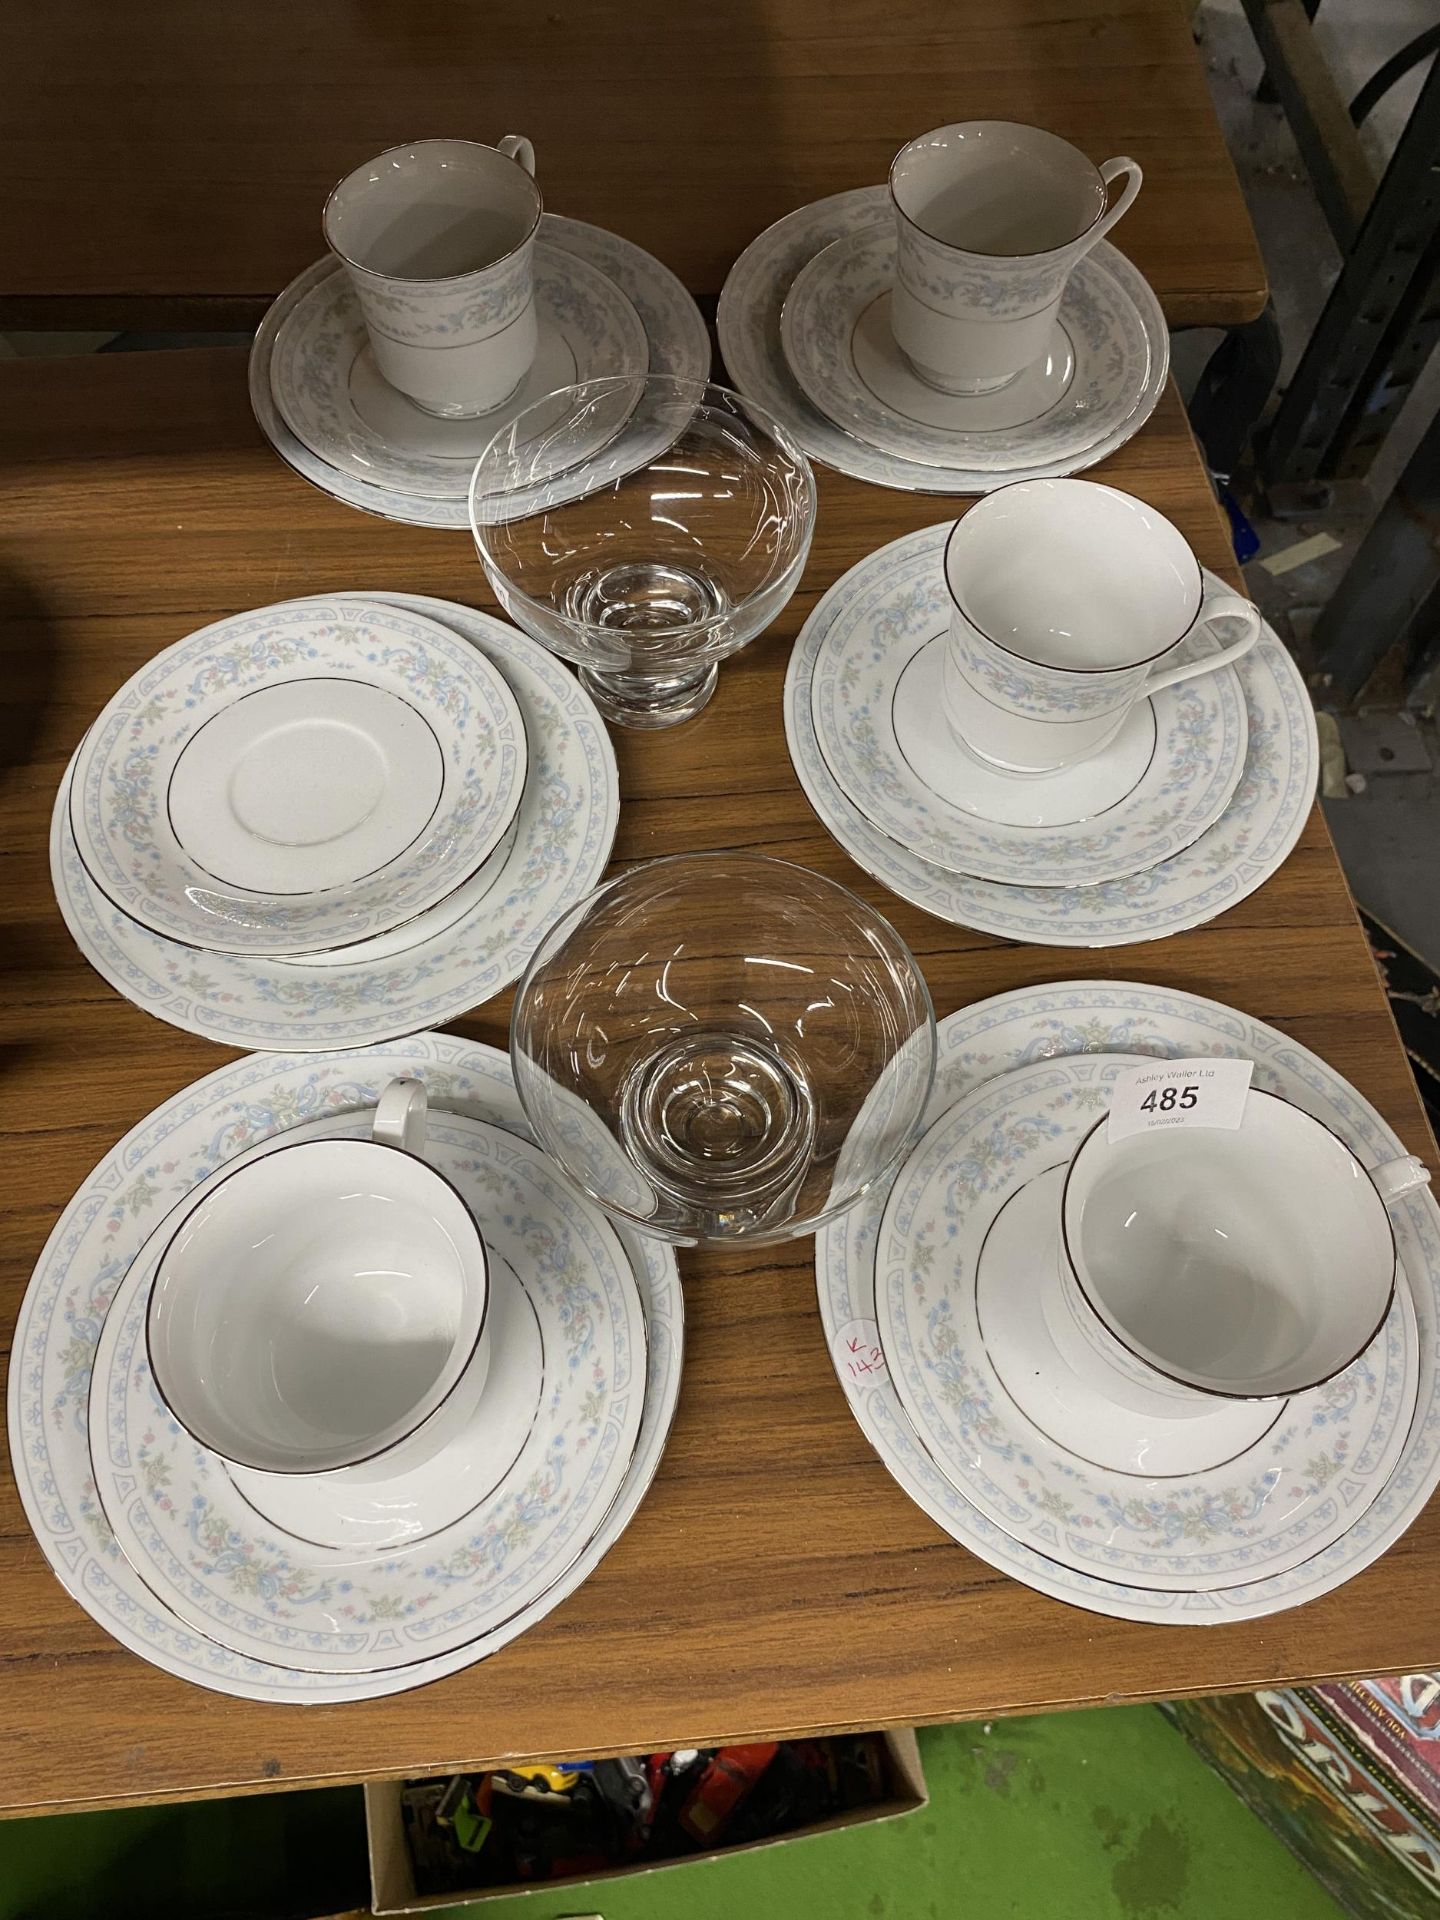 A QUANTITY OF CROWN MING CHINA CUPS, SAUCERS AND SIDE PLATES PLUS TWO GLASS DESSERT BOWLS